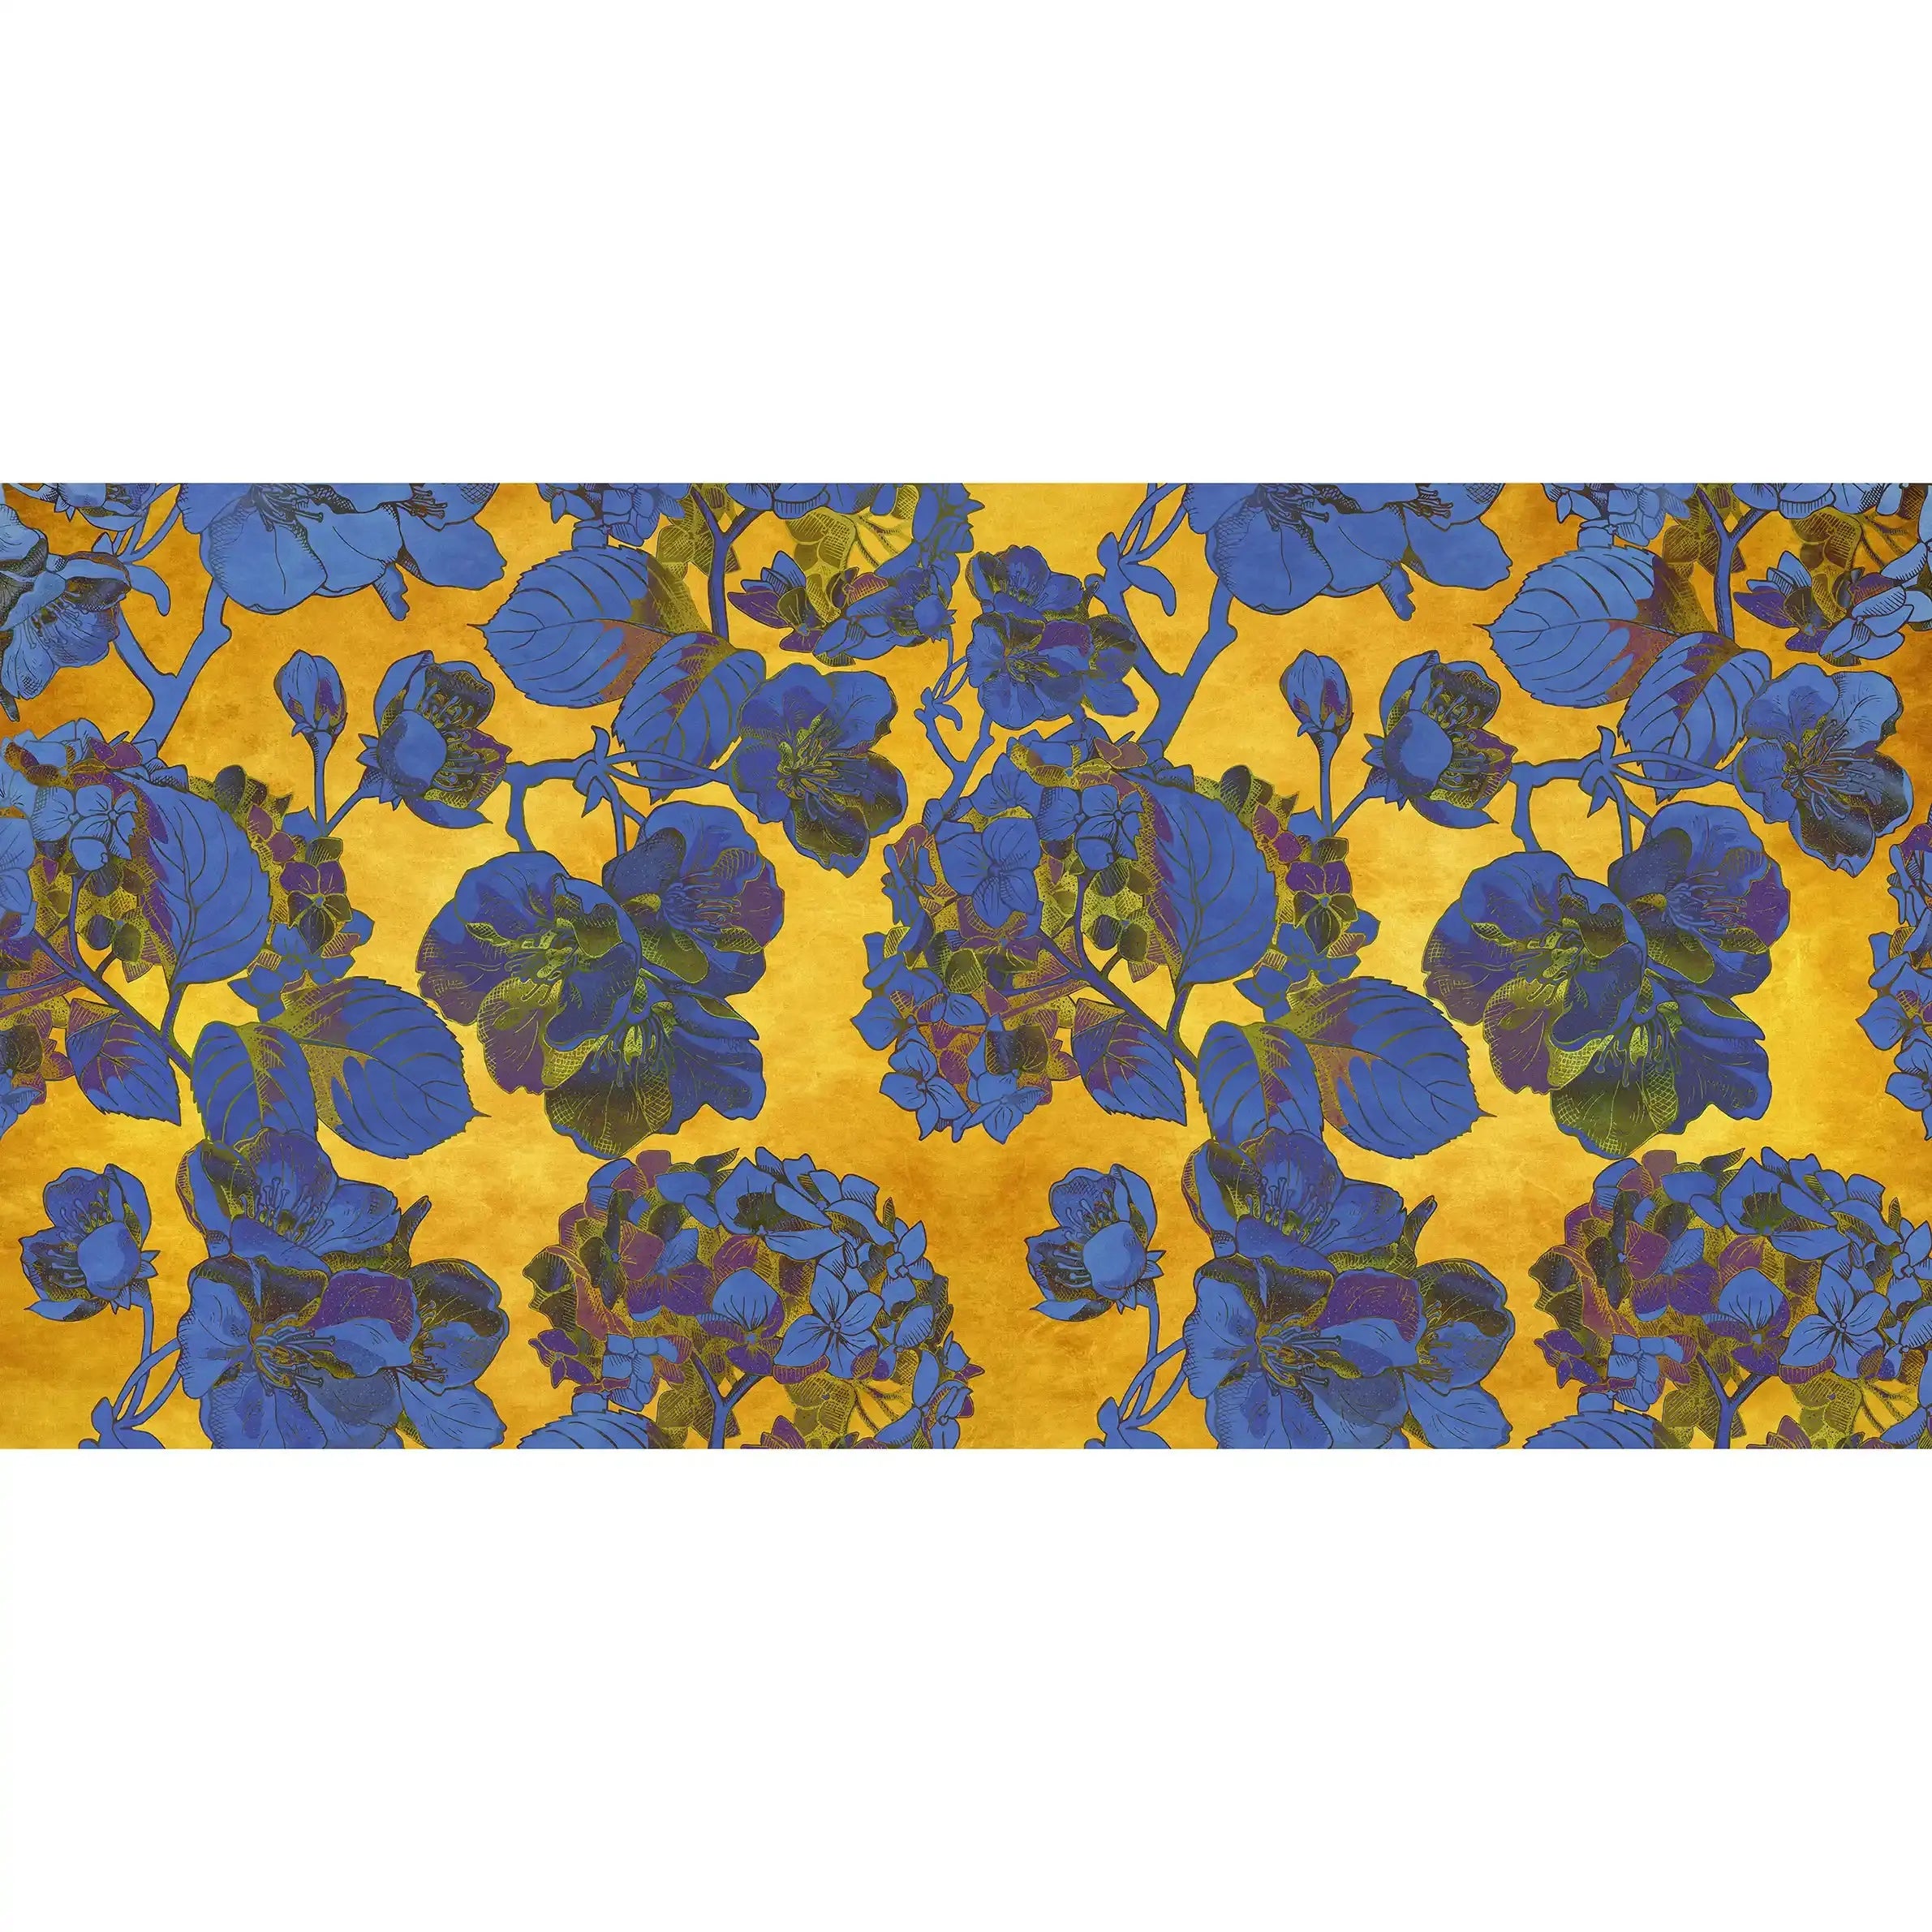 3036-B / Vintage Floral Mural Wallpaper: Yellow and Blue Art Style, Easy Install for Accent Wall Decor and Bathroom - Artevella